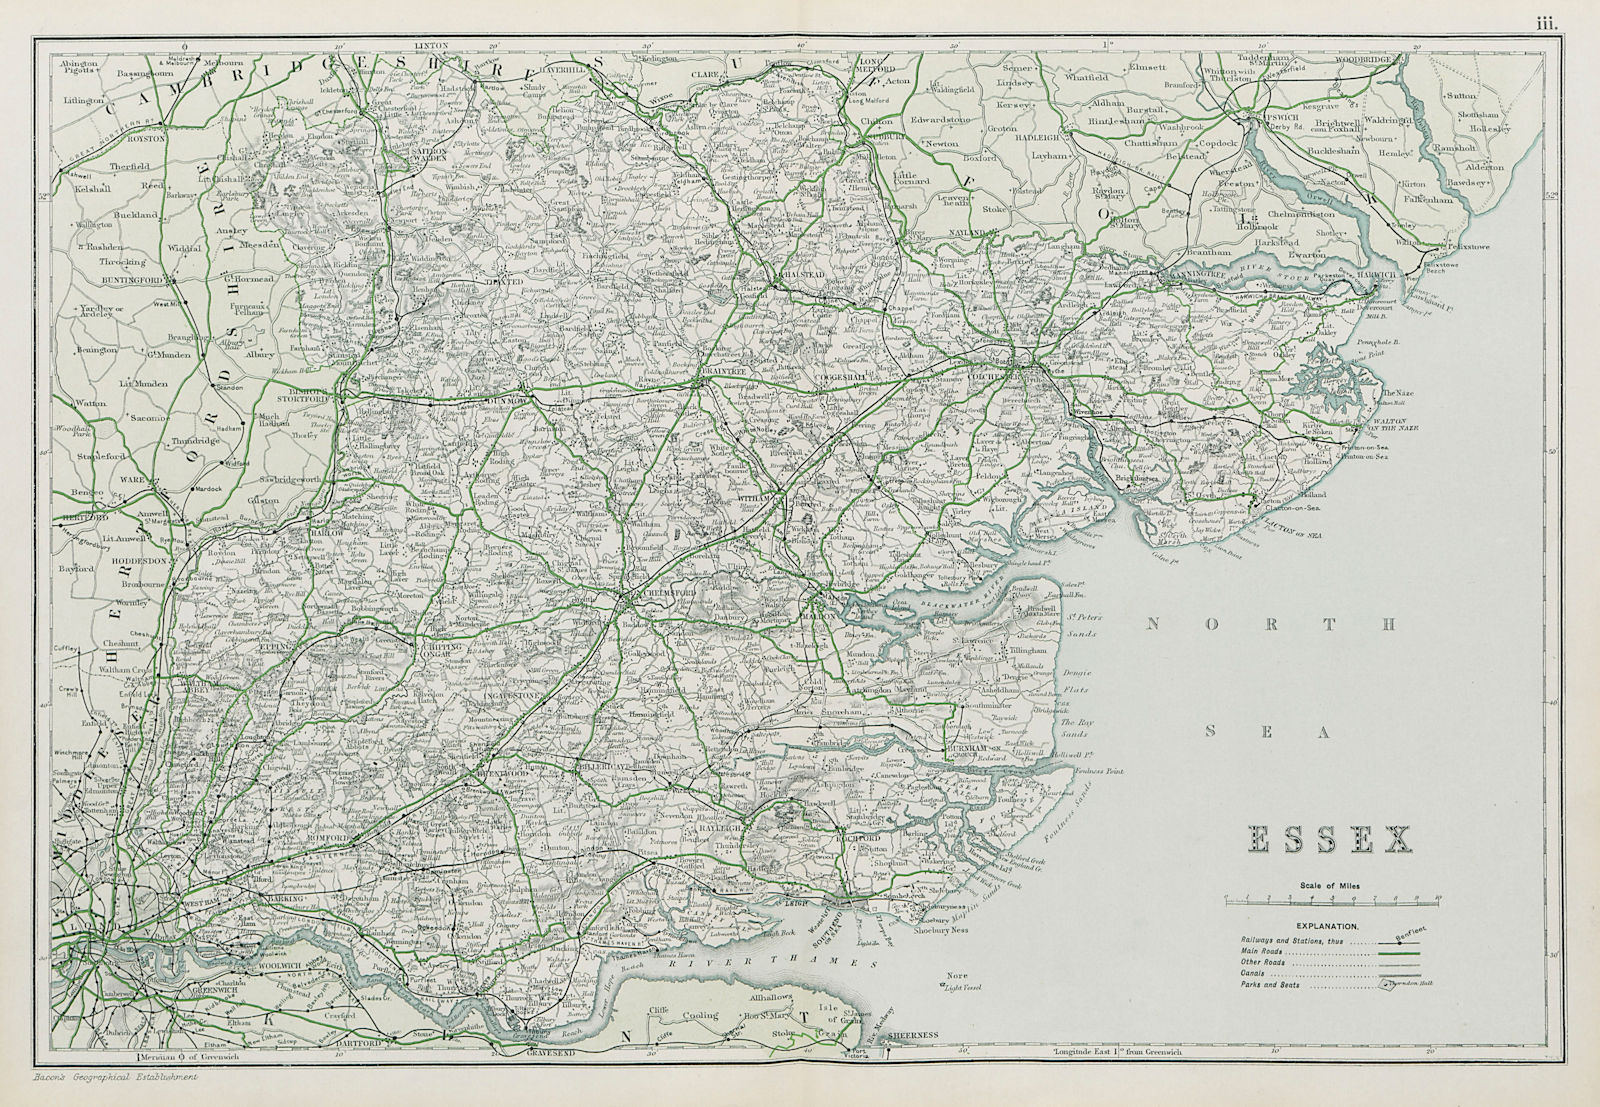 Associate Product ESSEX. Showing Parliamentary divisions, boroughs & parks. BACON 1913 old map